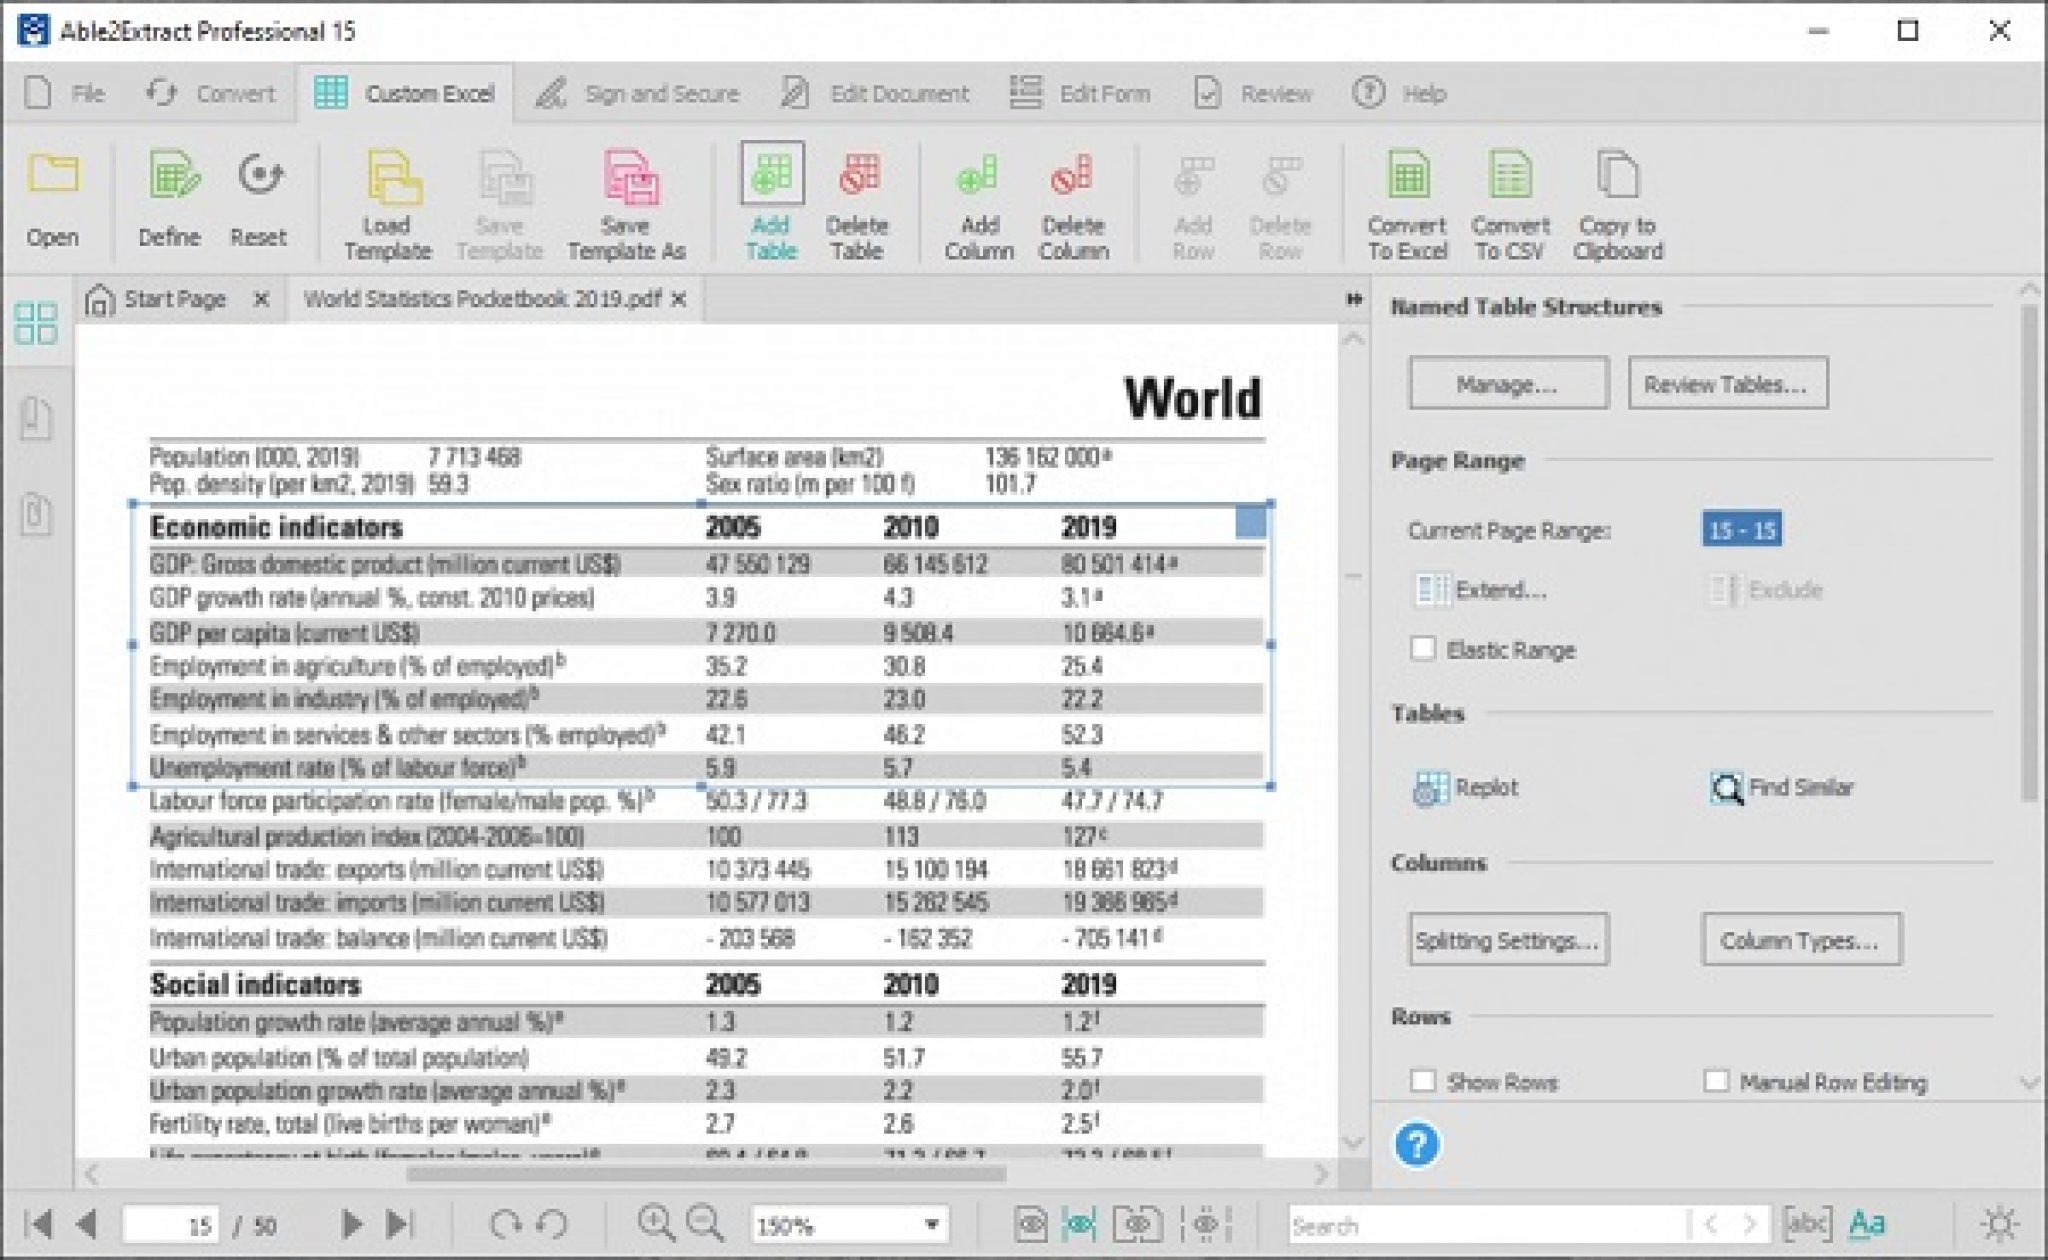 Able2Extract Professional 18.0.6.0 free downloads